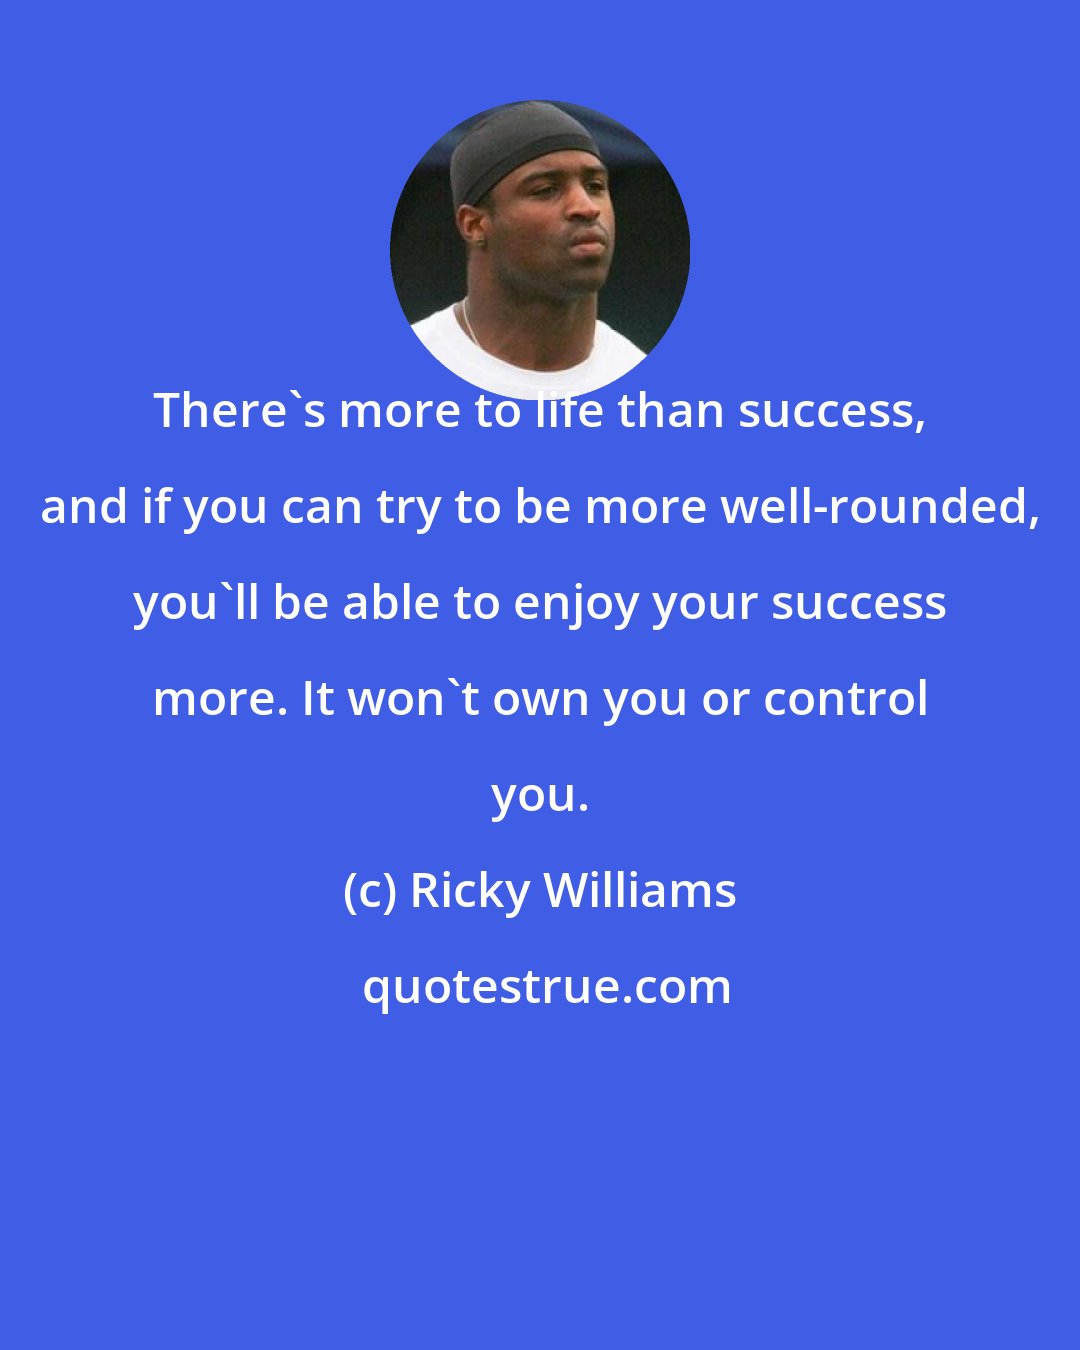 Ricky Williams: There's more to life than success, and if you can try to be more well-rounded, you'll be able to enjoy your success more. It won't own you or control you.